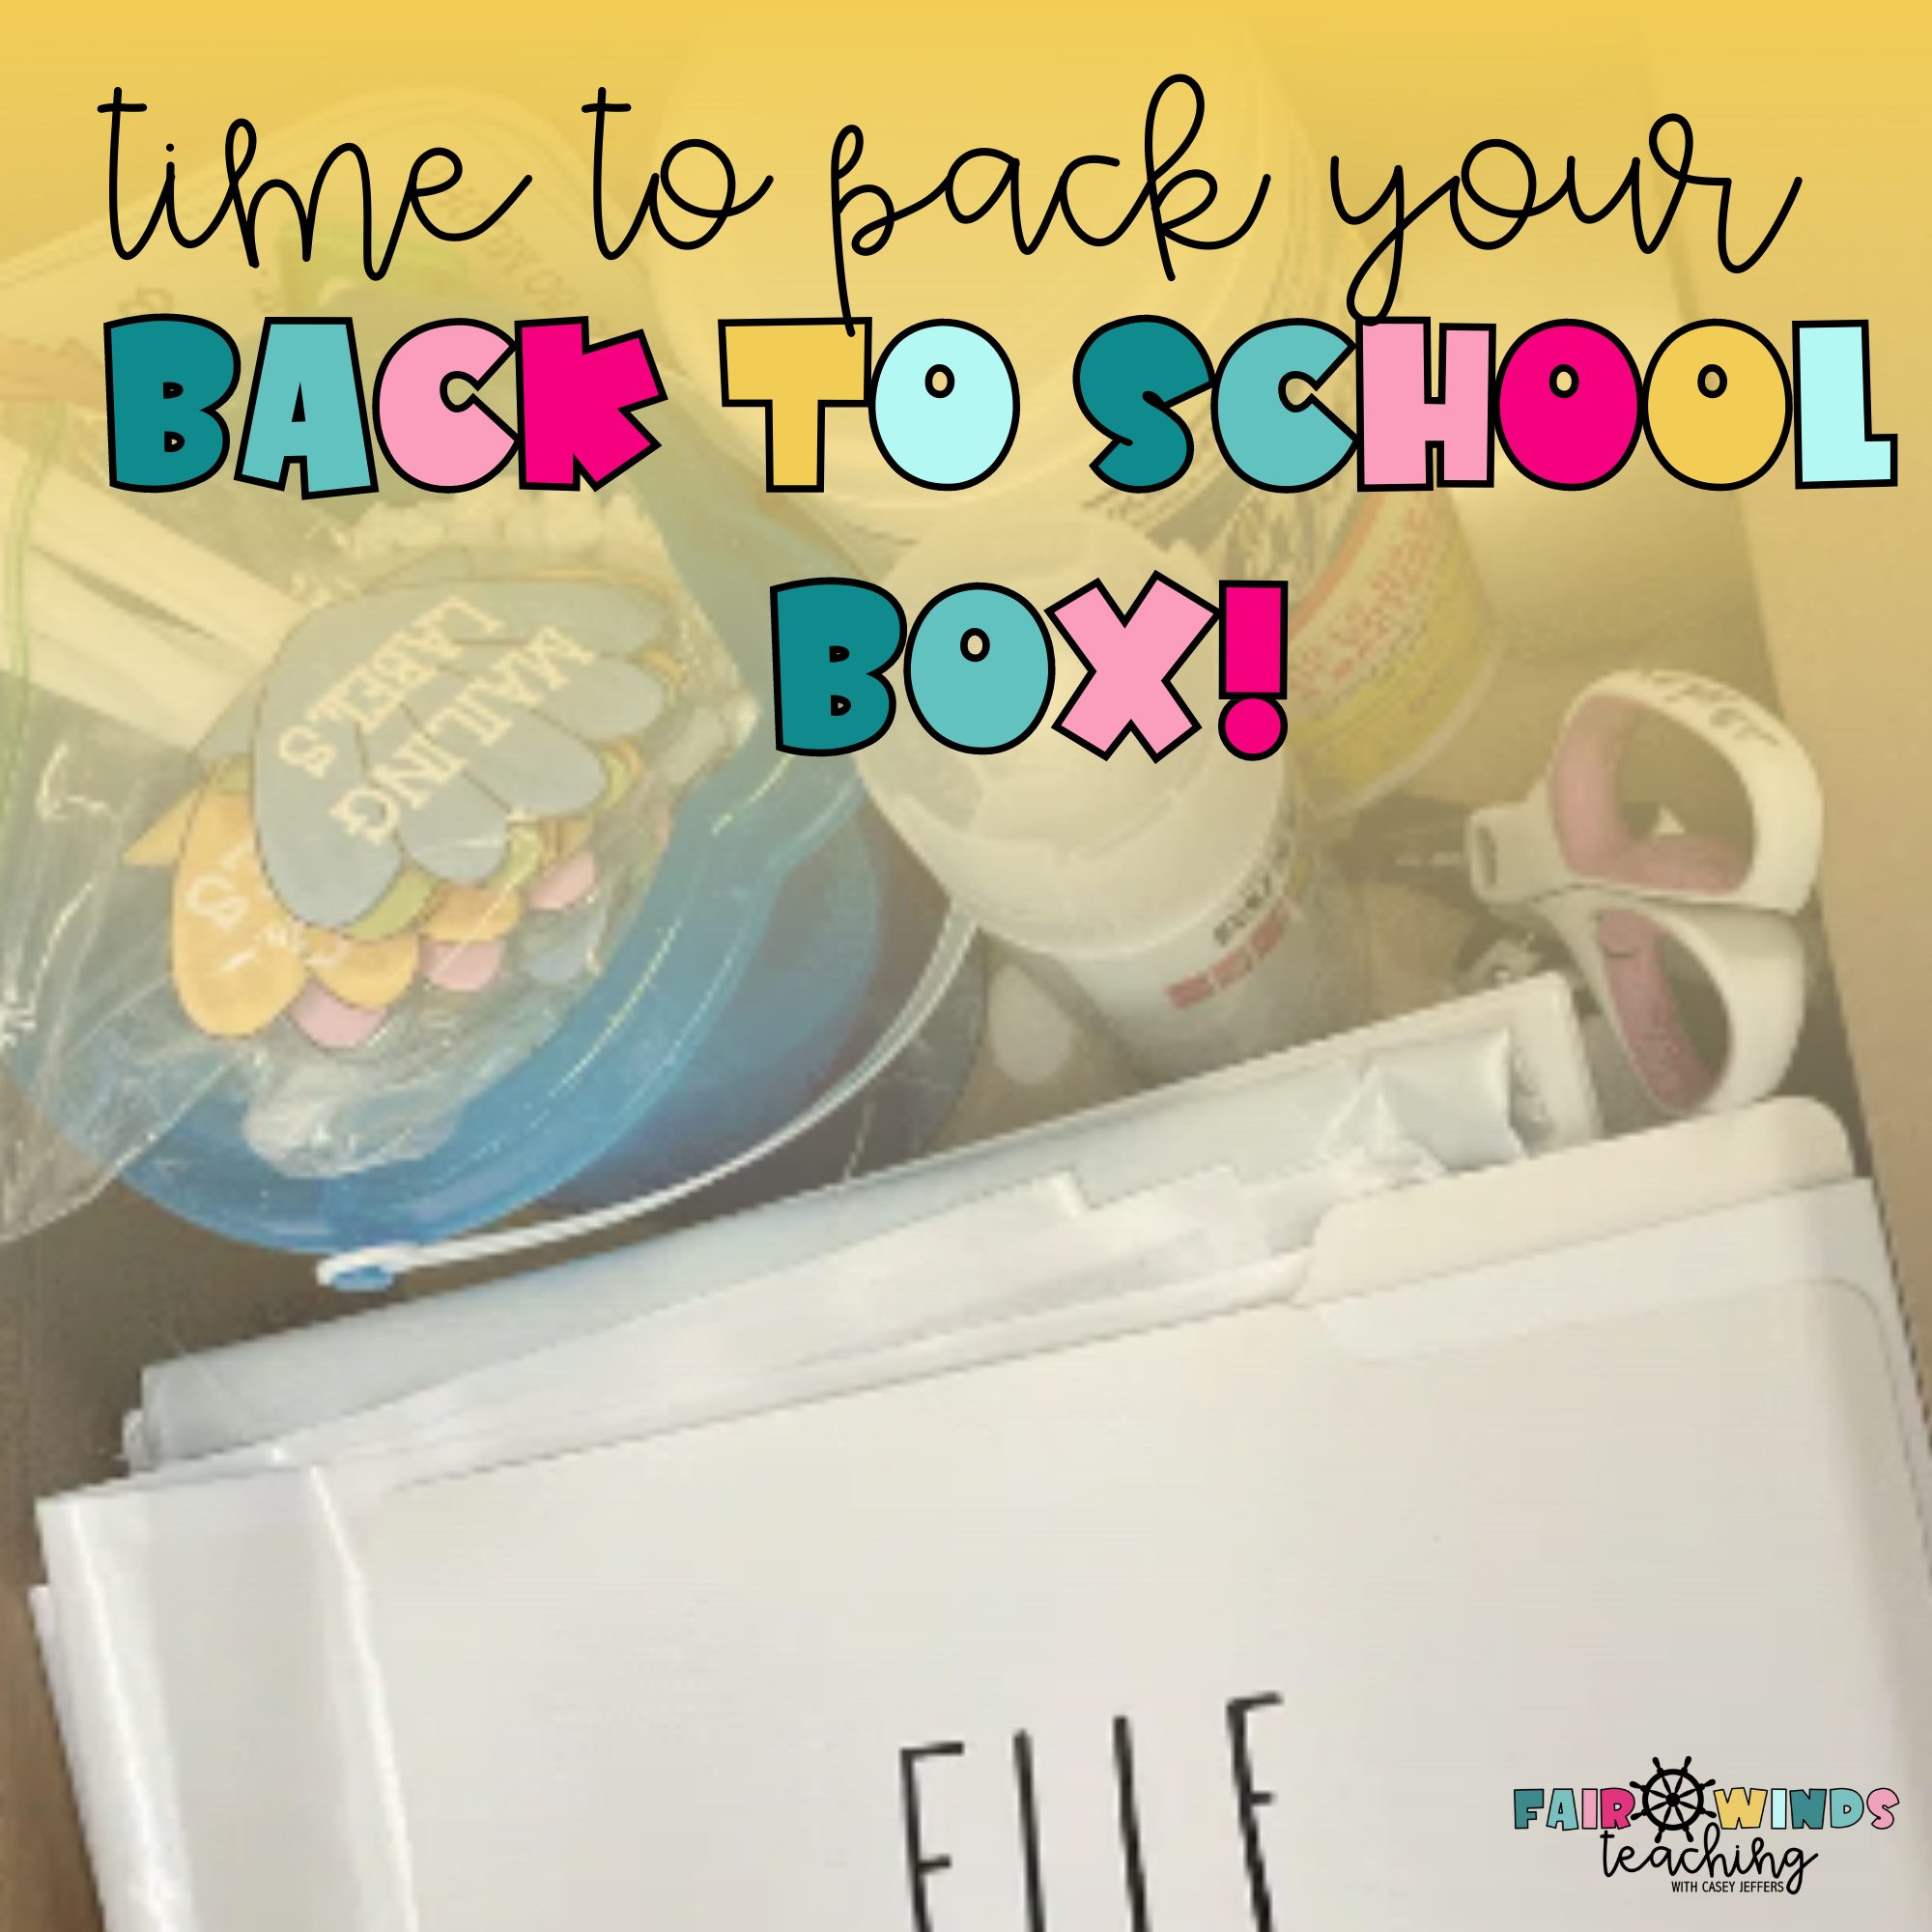 Packing Up Your Classroom? It’s the Perfect Time to Set Up Your Back to School Box